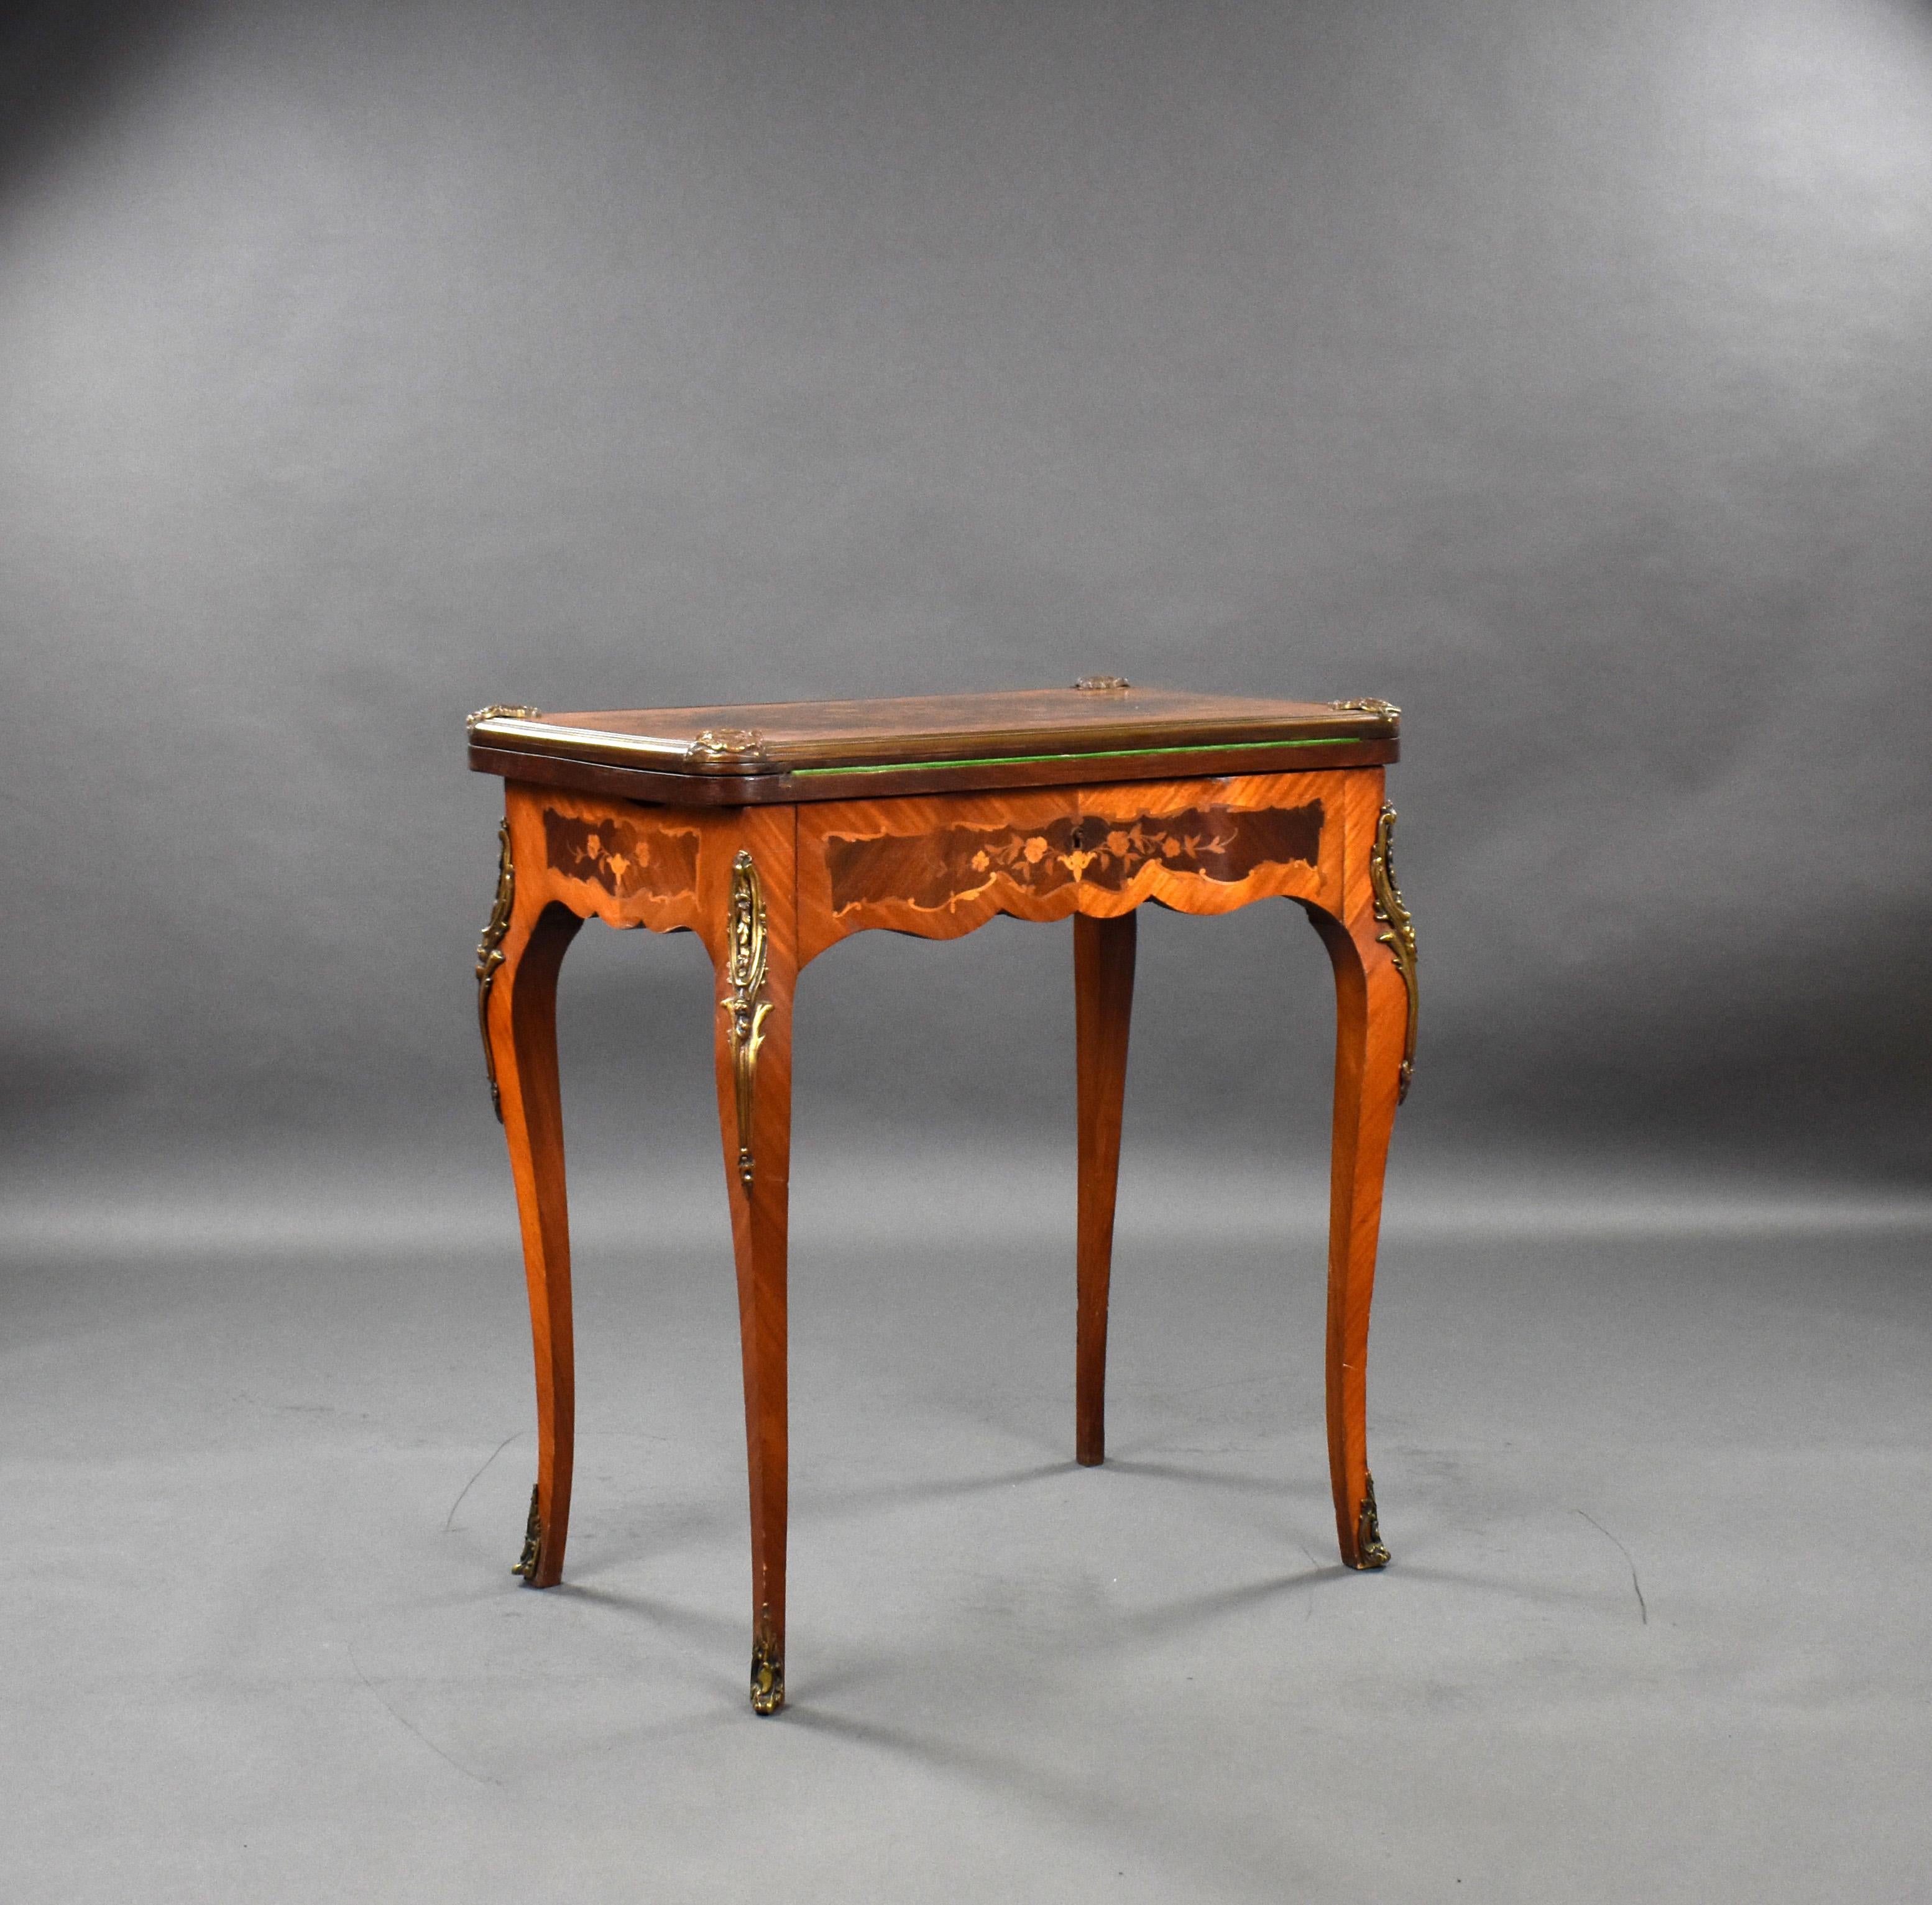 For sale is a fine quality Victorian card table, also fitted with a vanity. The card table is beautifully inlaid and is decorated with ormolu mounts. This piece is in good condition for its age, showing minor signs of wear commensurate with age and